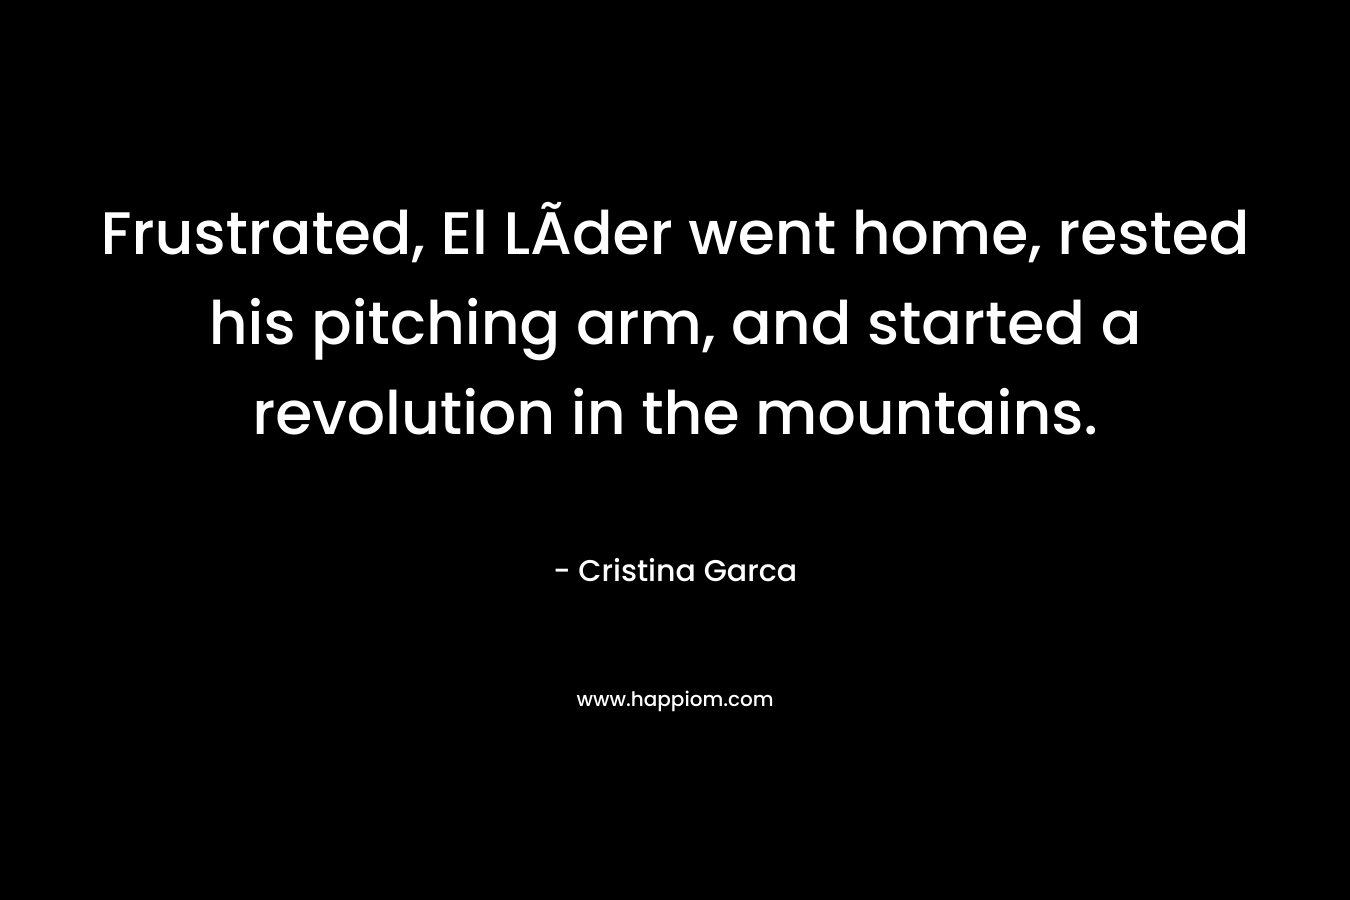 Frustrated, El LÃ­der went home, rested his pitching arm, and started a revolution in the mountains. – Cristina Garca